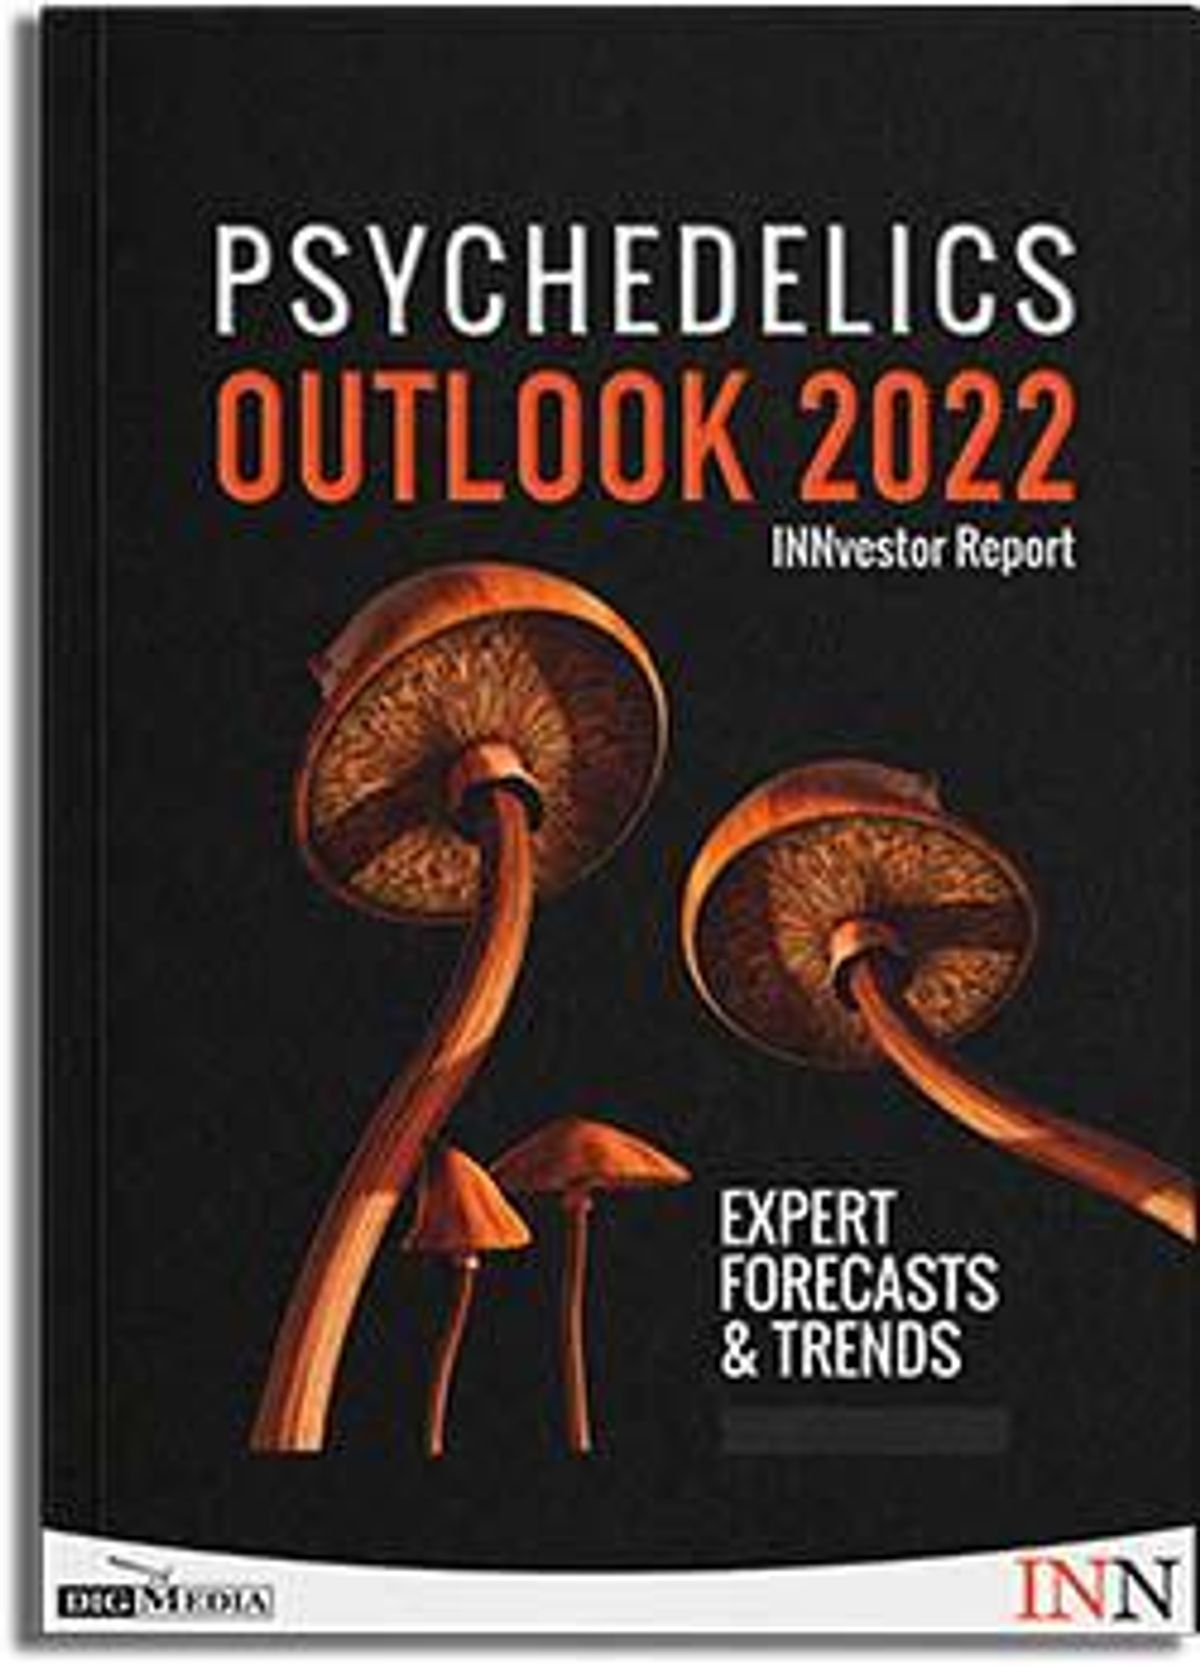 New! Download Our FREE 2022 Psychedelics Outlook Report